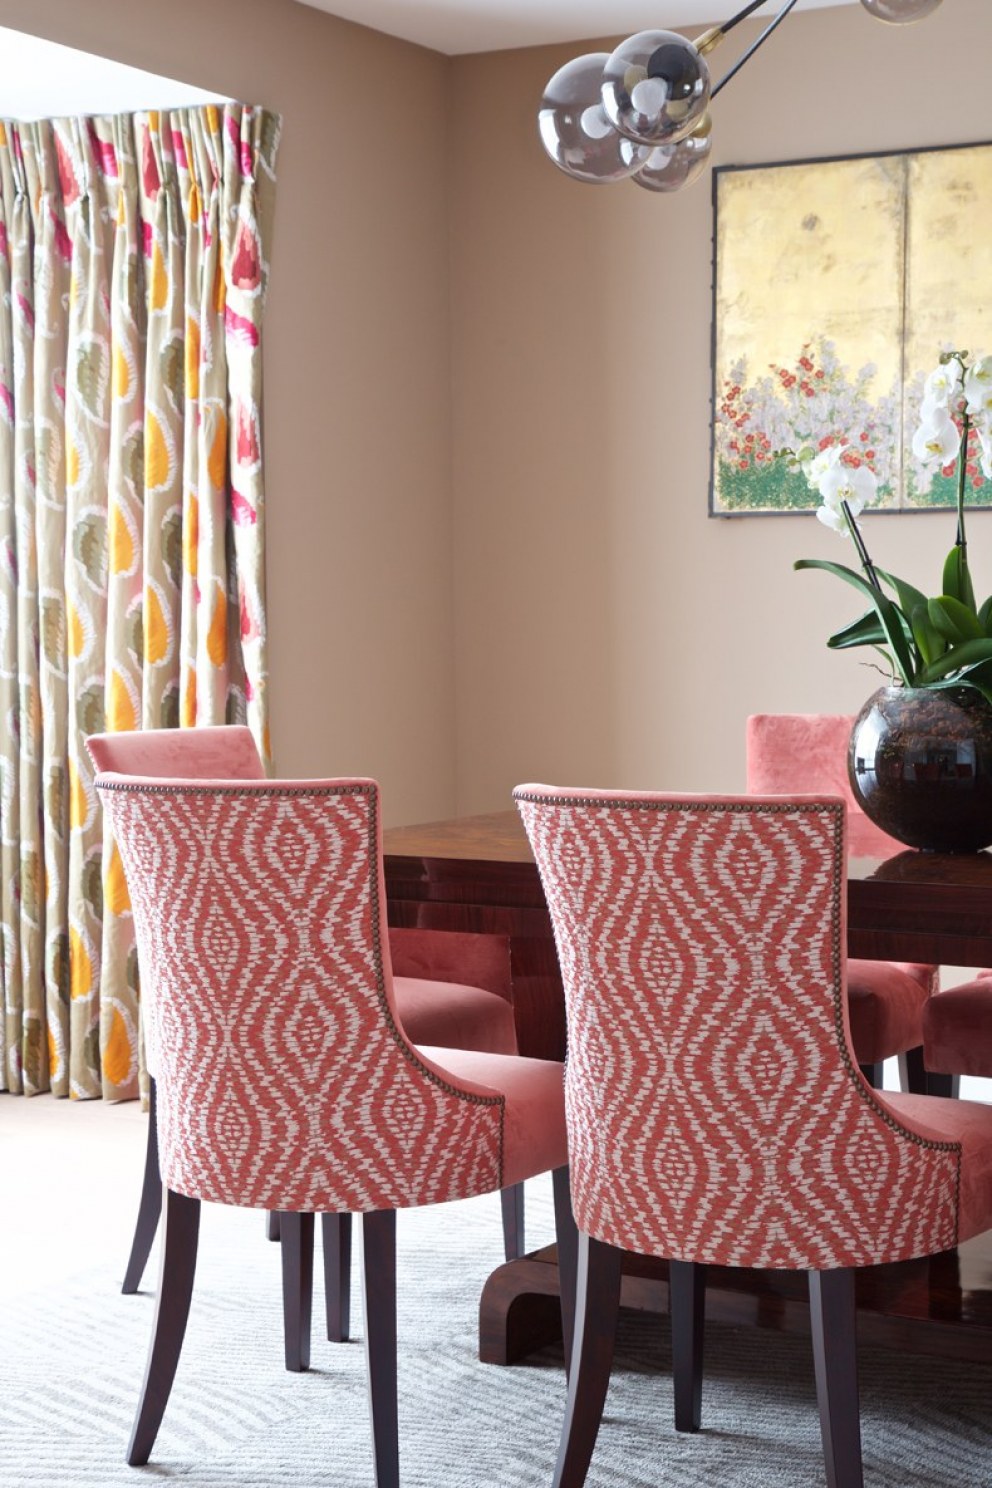 Thame, Oxfordshire | Dining Room and Curtains | Interior Designers